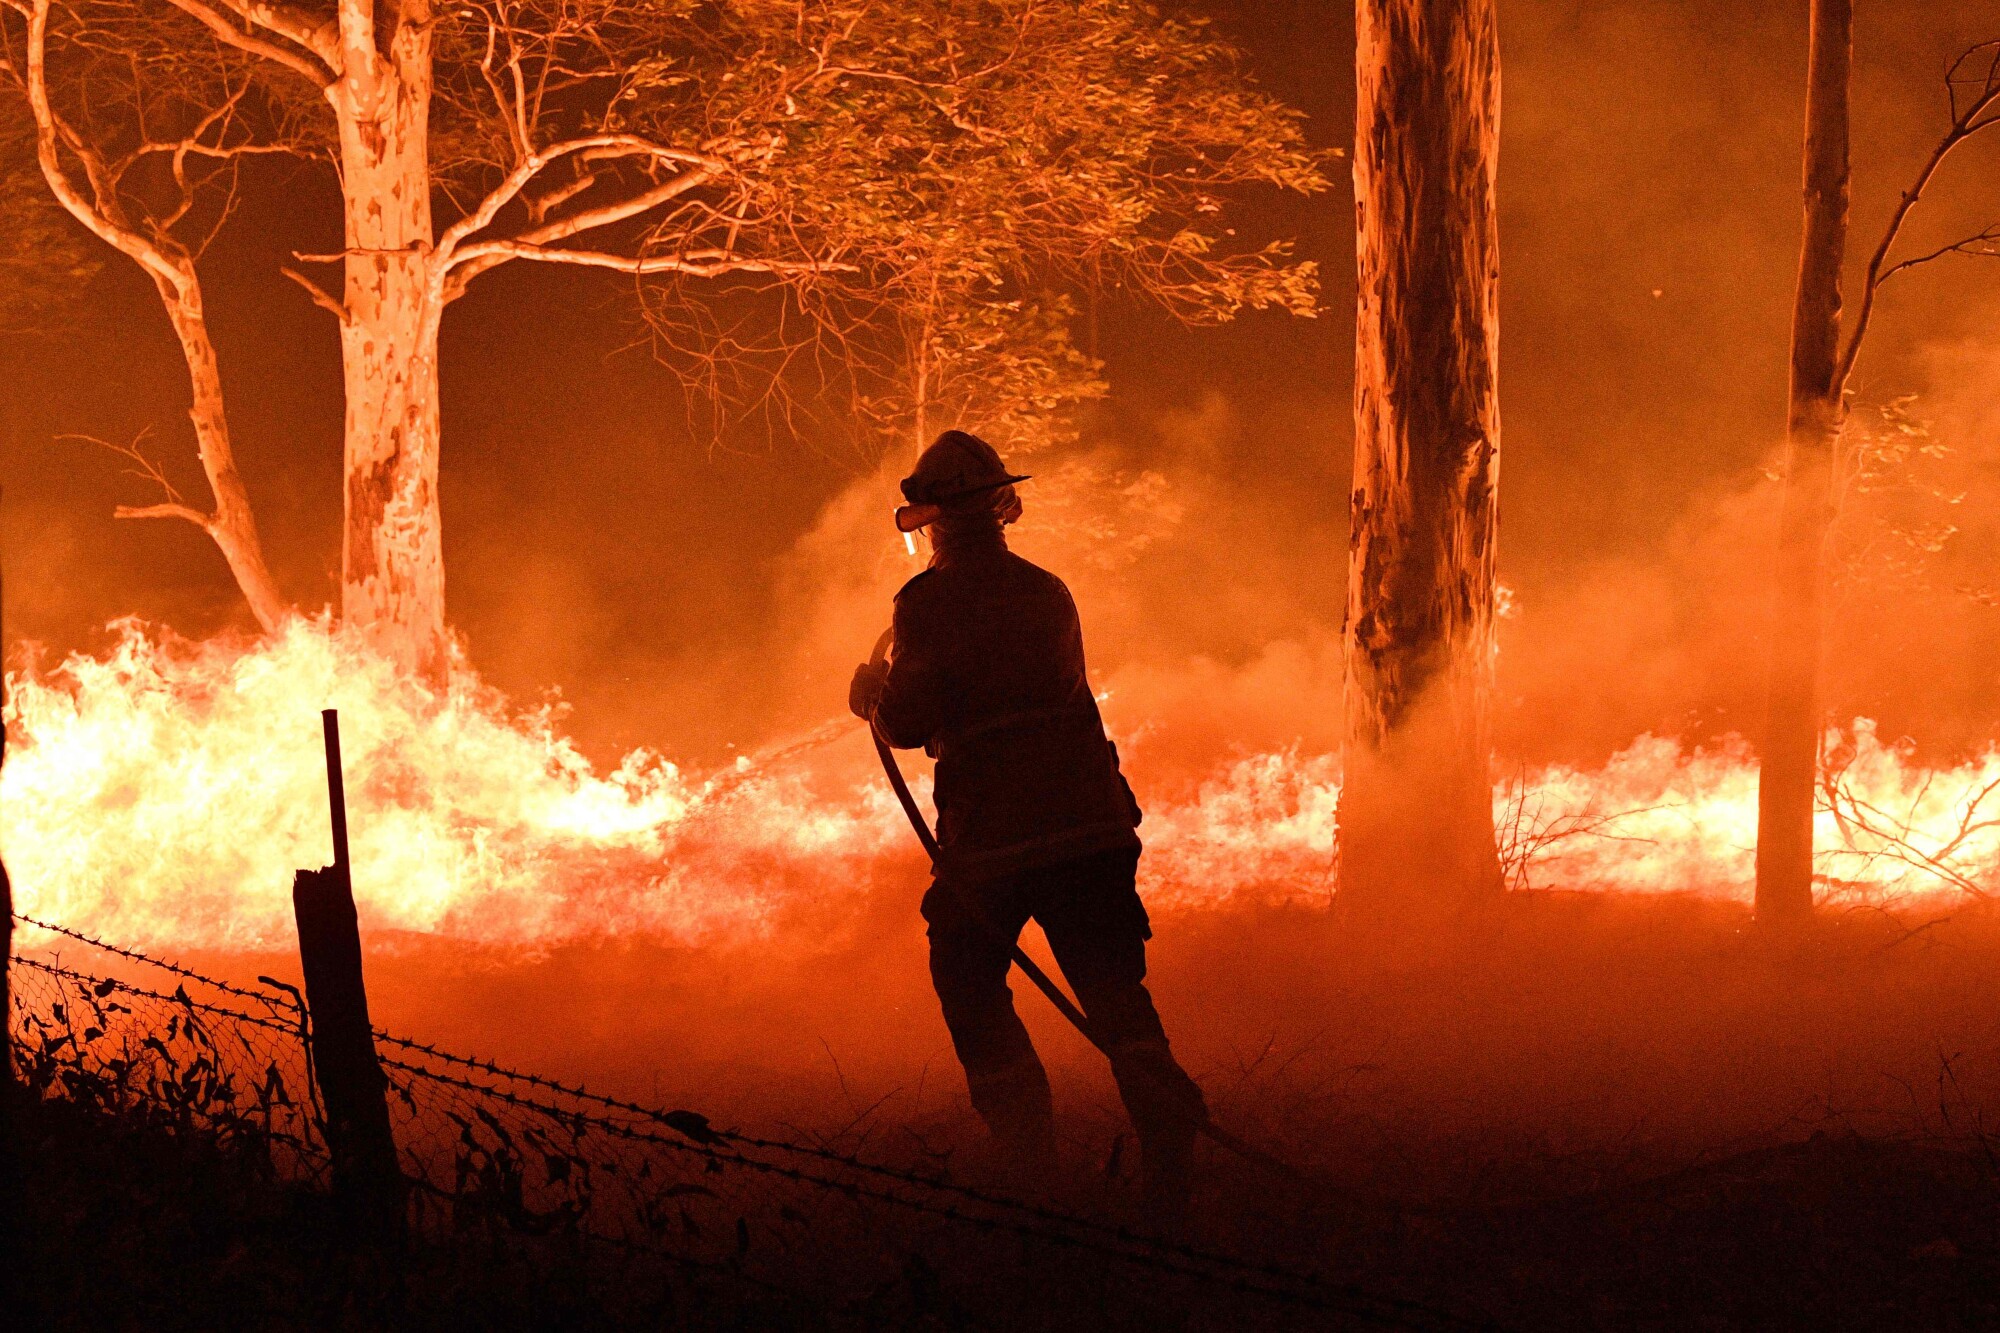 A firefighter hoses down trees and flying embers in an effort to protect nearby houses outside the town of Nowra in the Australian state of New South Wales.